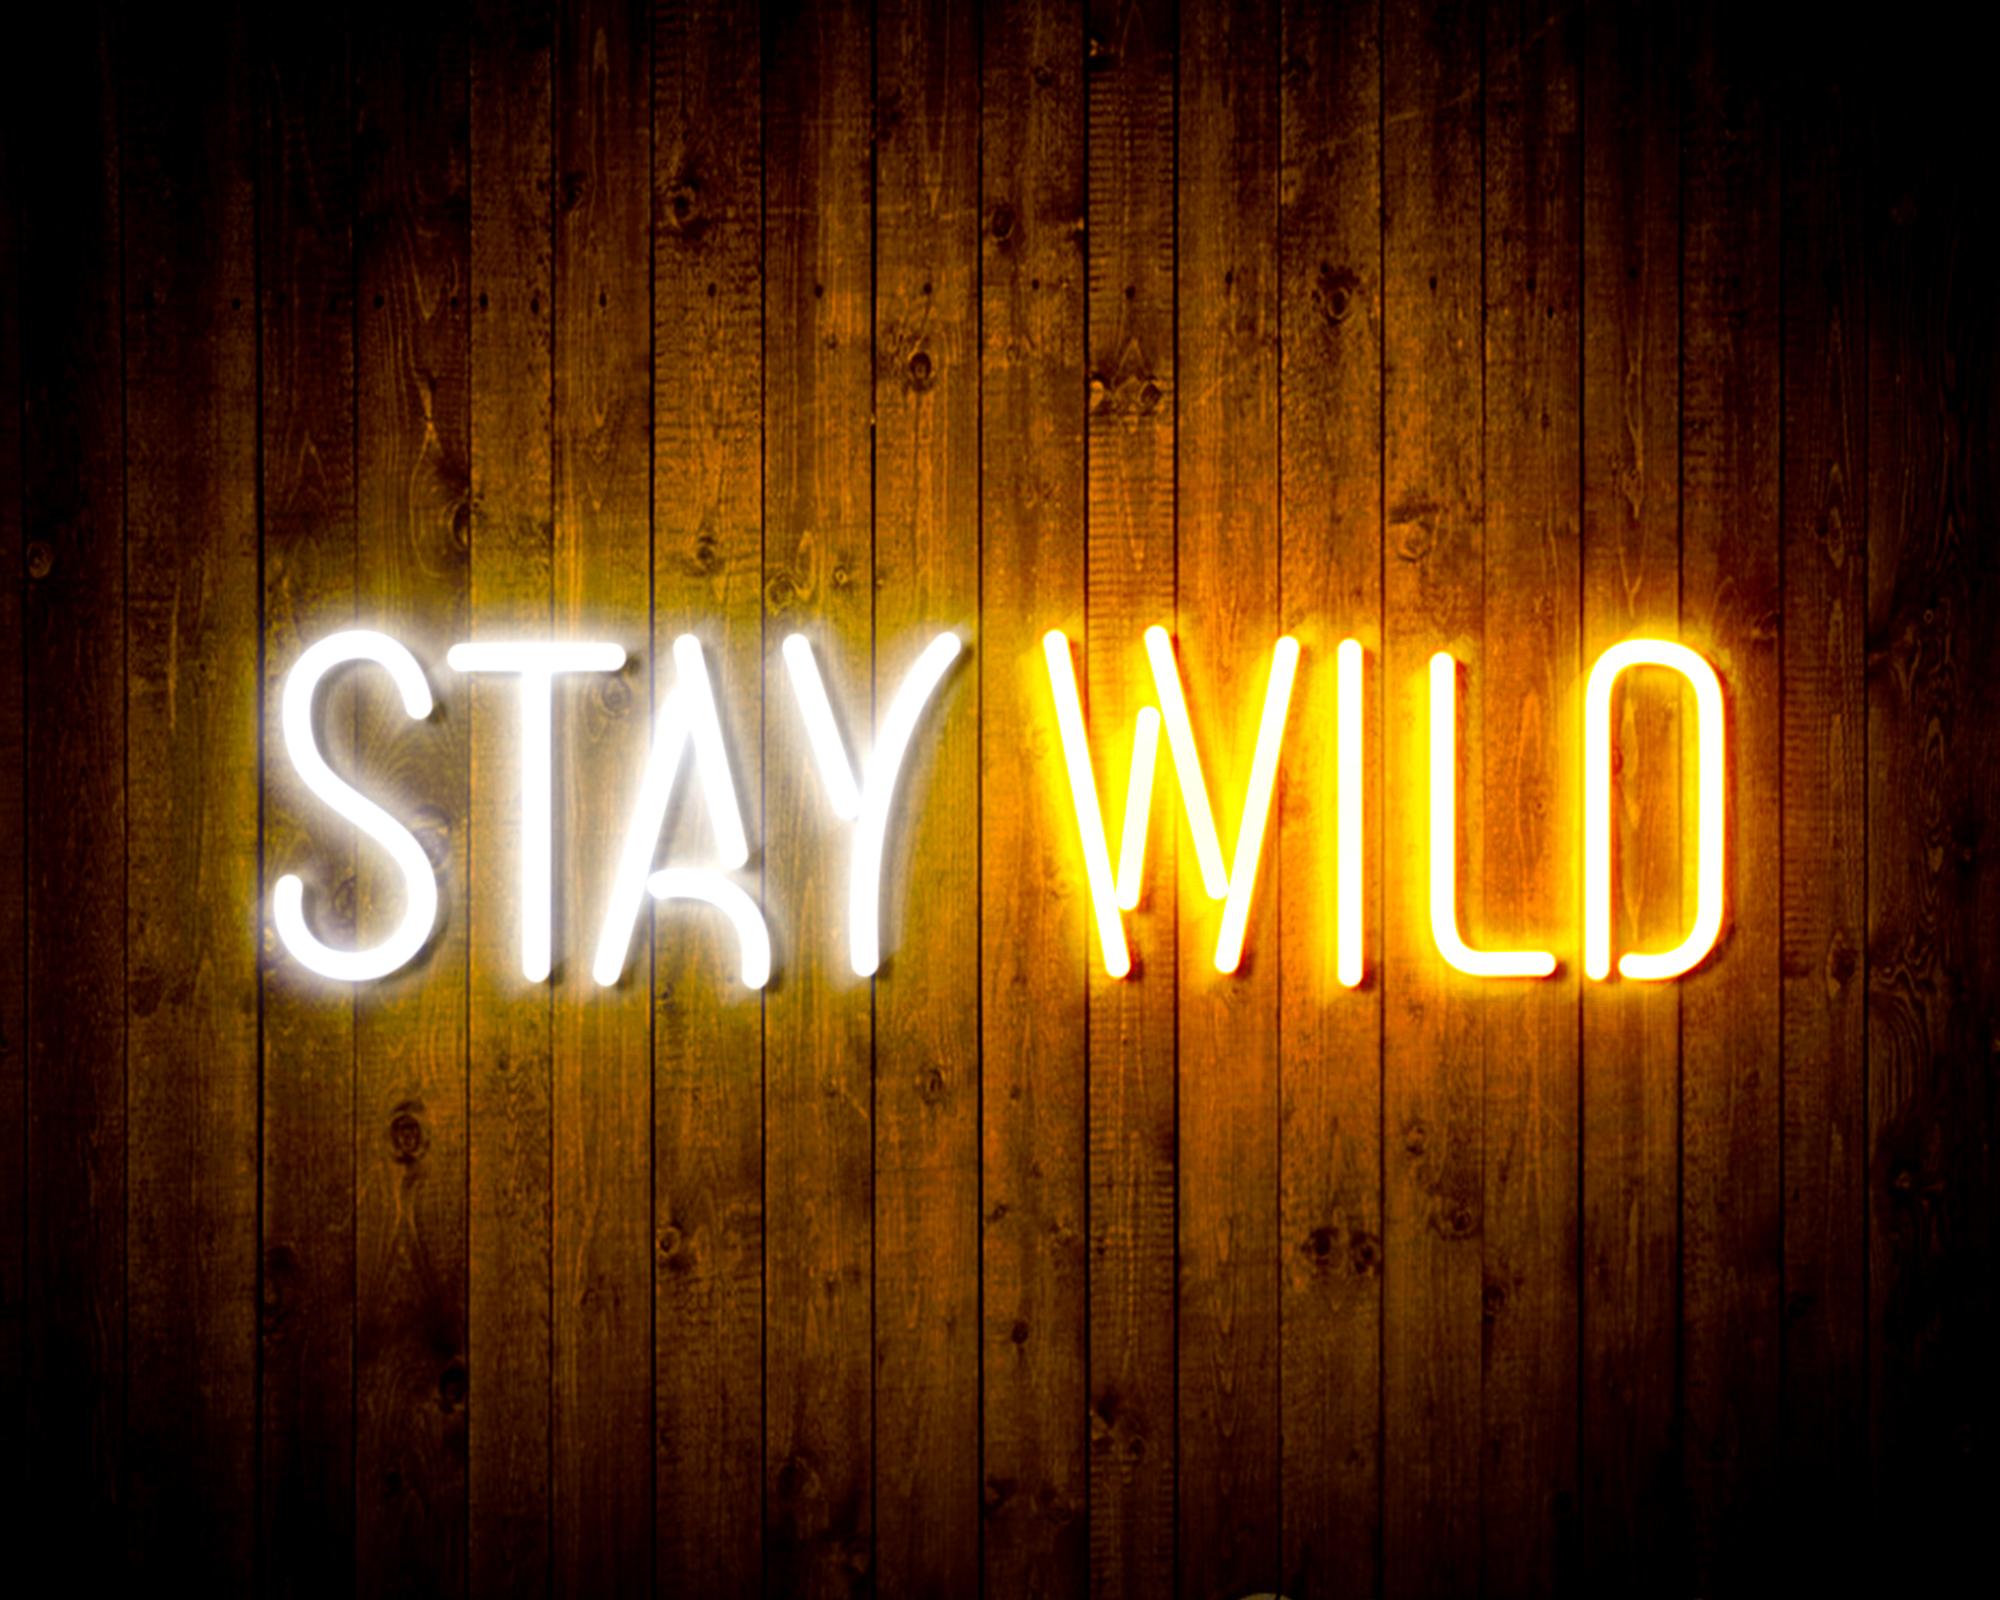 "STAY WILD" LED Neon Sign Wall Light